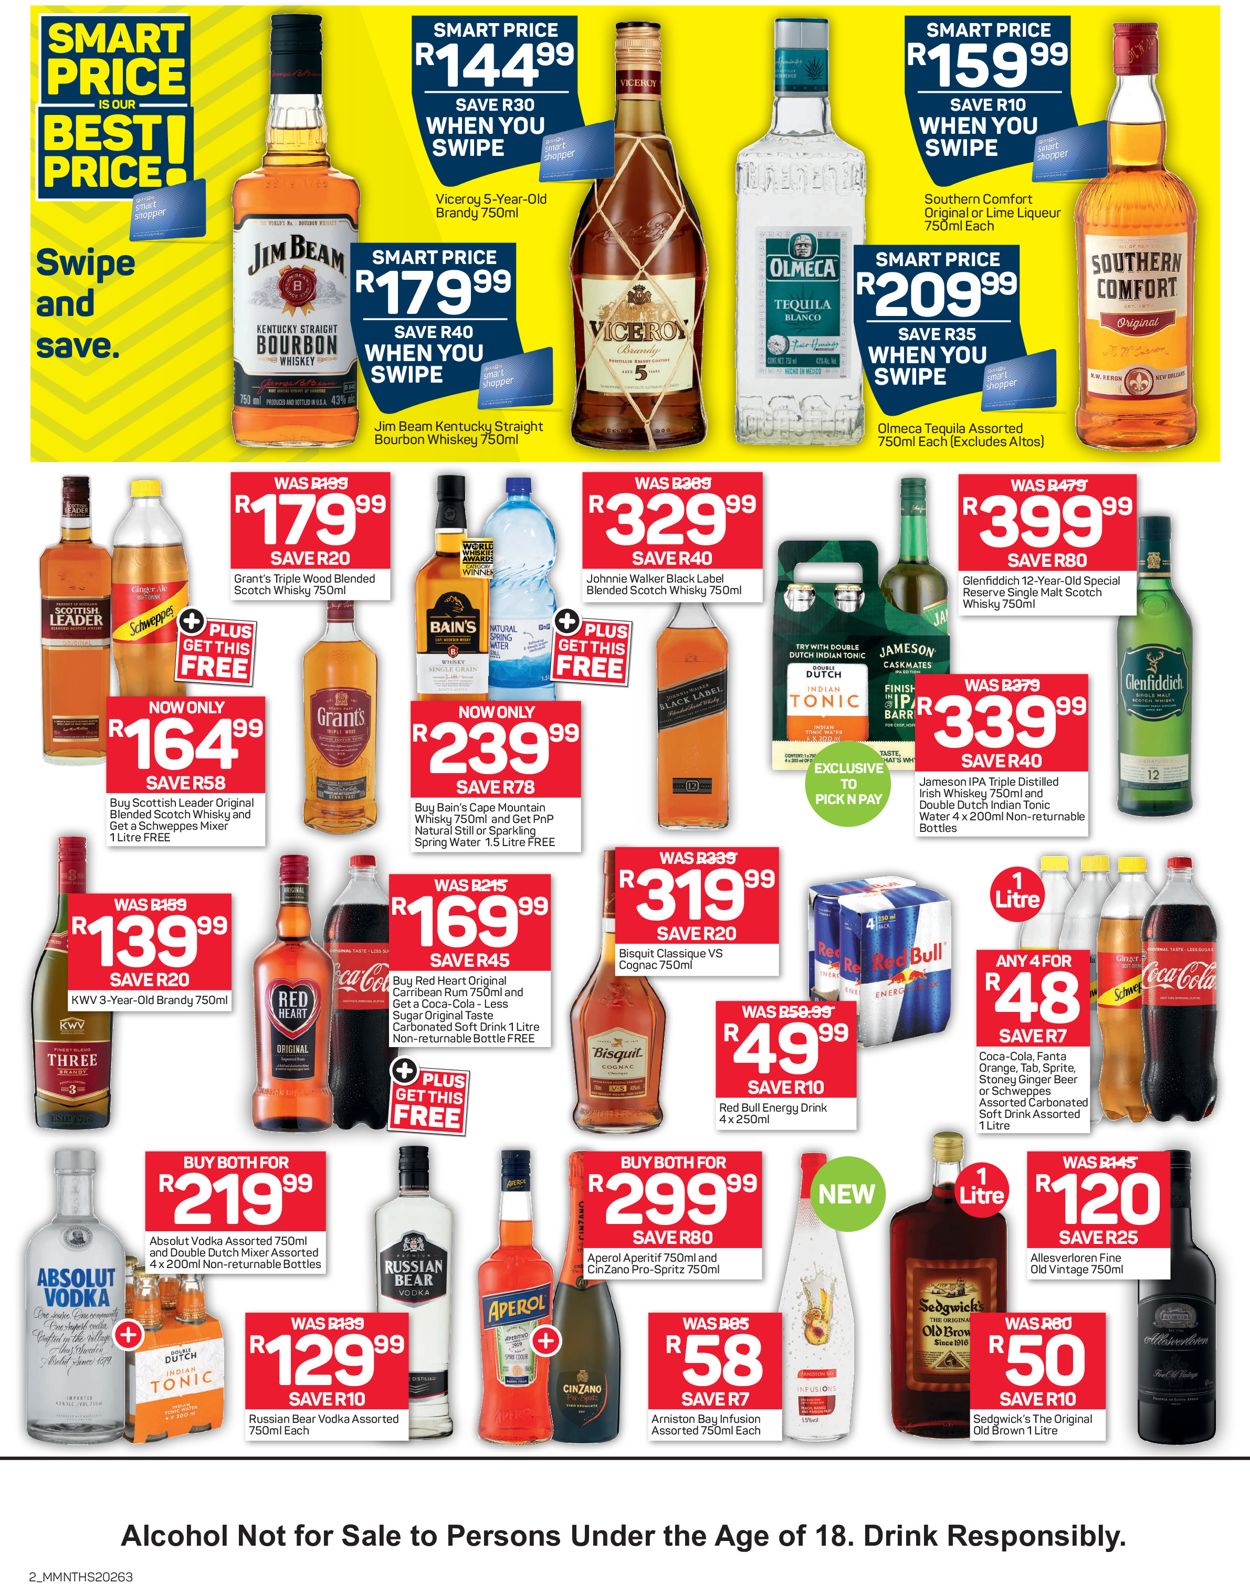 Pick n Pay Catalogue from 2020/09/24